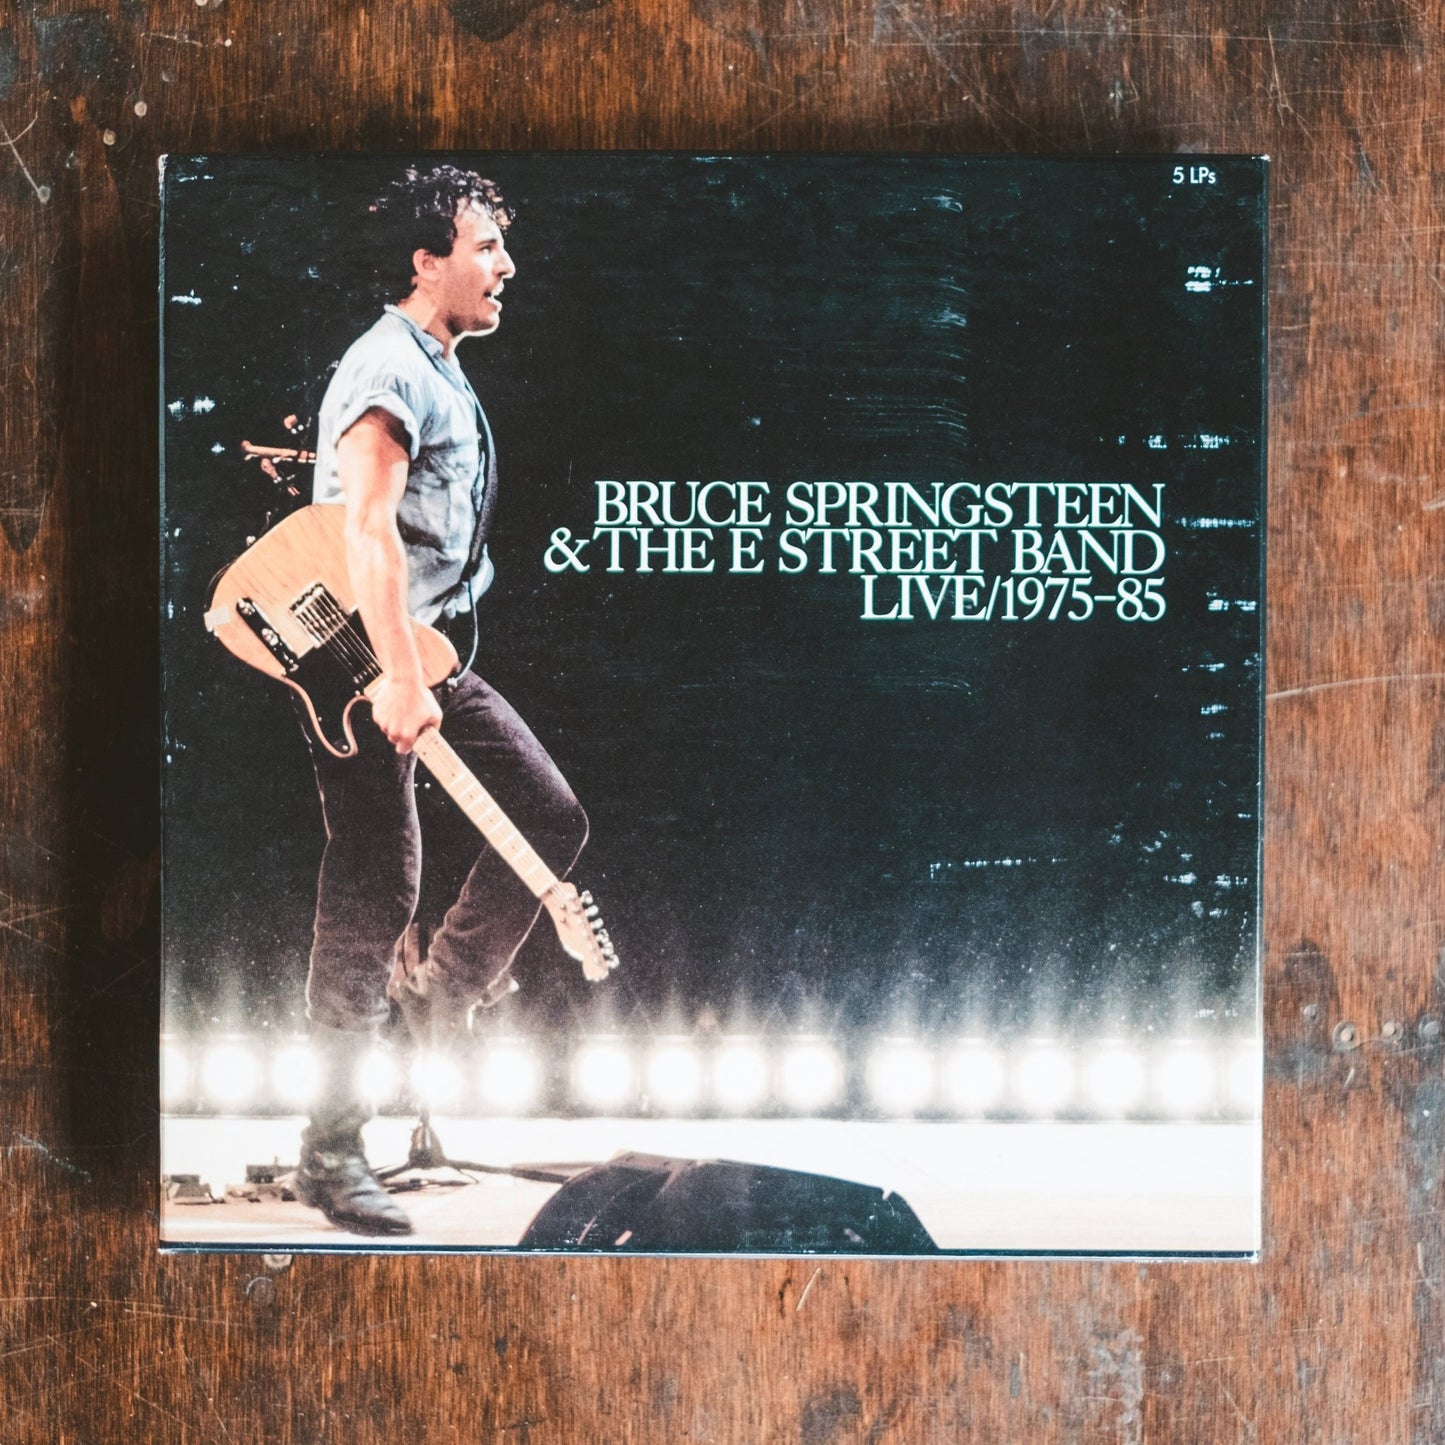 Springsteen, Bruce & The E Street Band - Live/1975-85 (Pre-Loved) - VG+ - Springsteen, Bruce & the E Street Band - Live/1975-85 - LP's - Yellow Racket Records